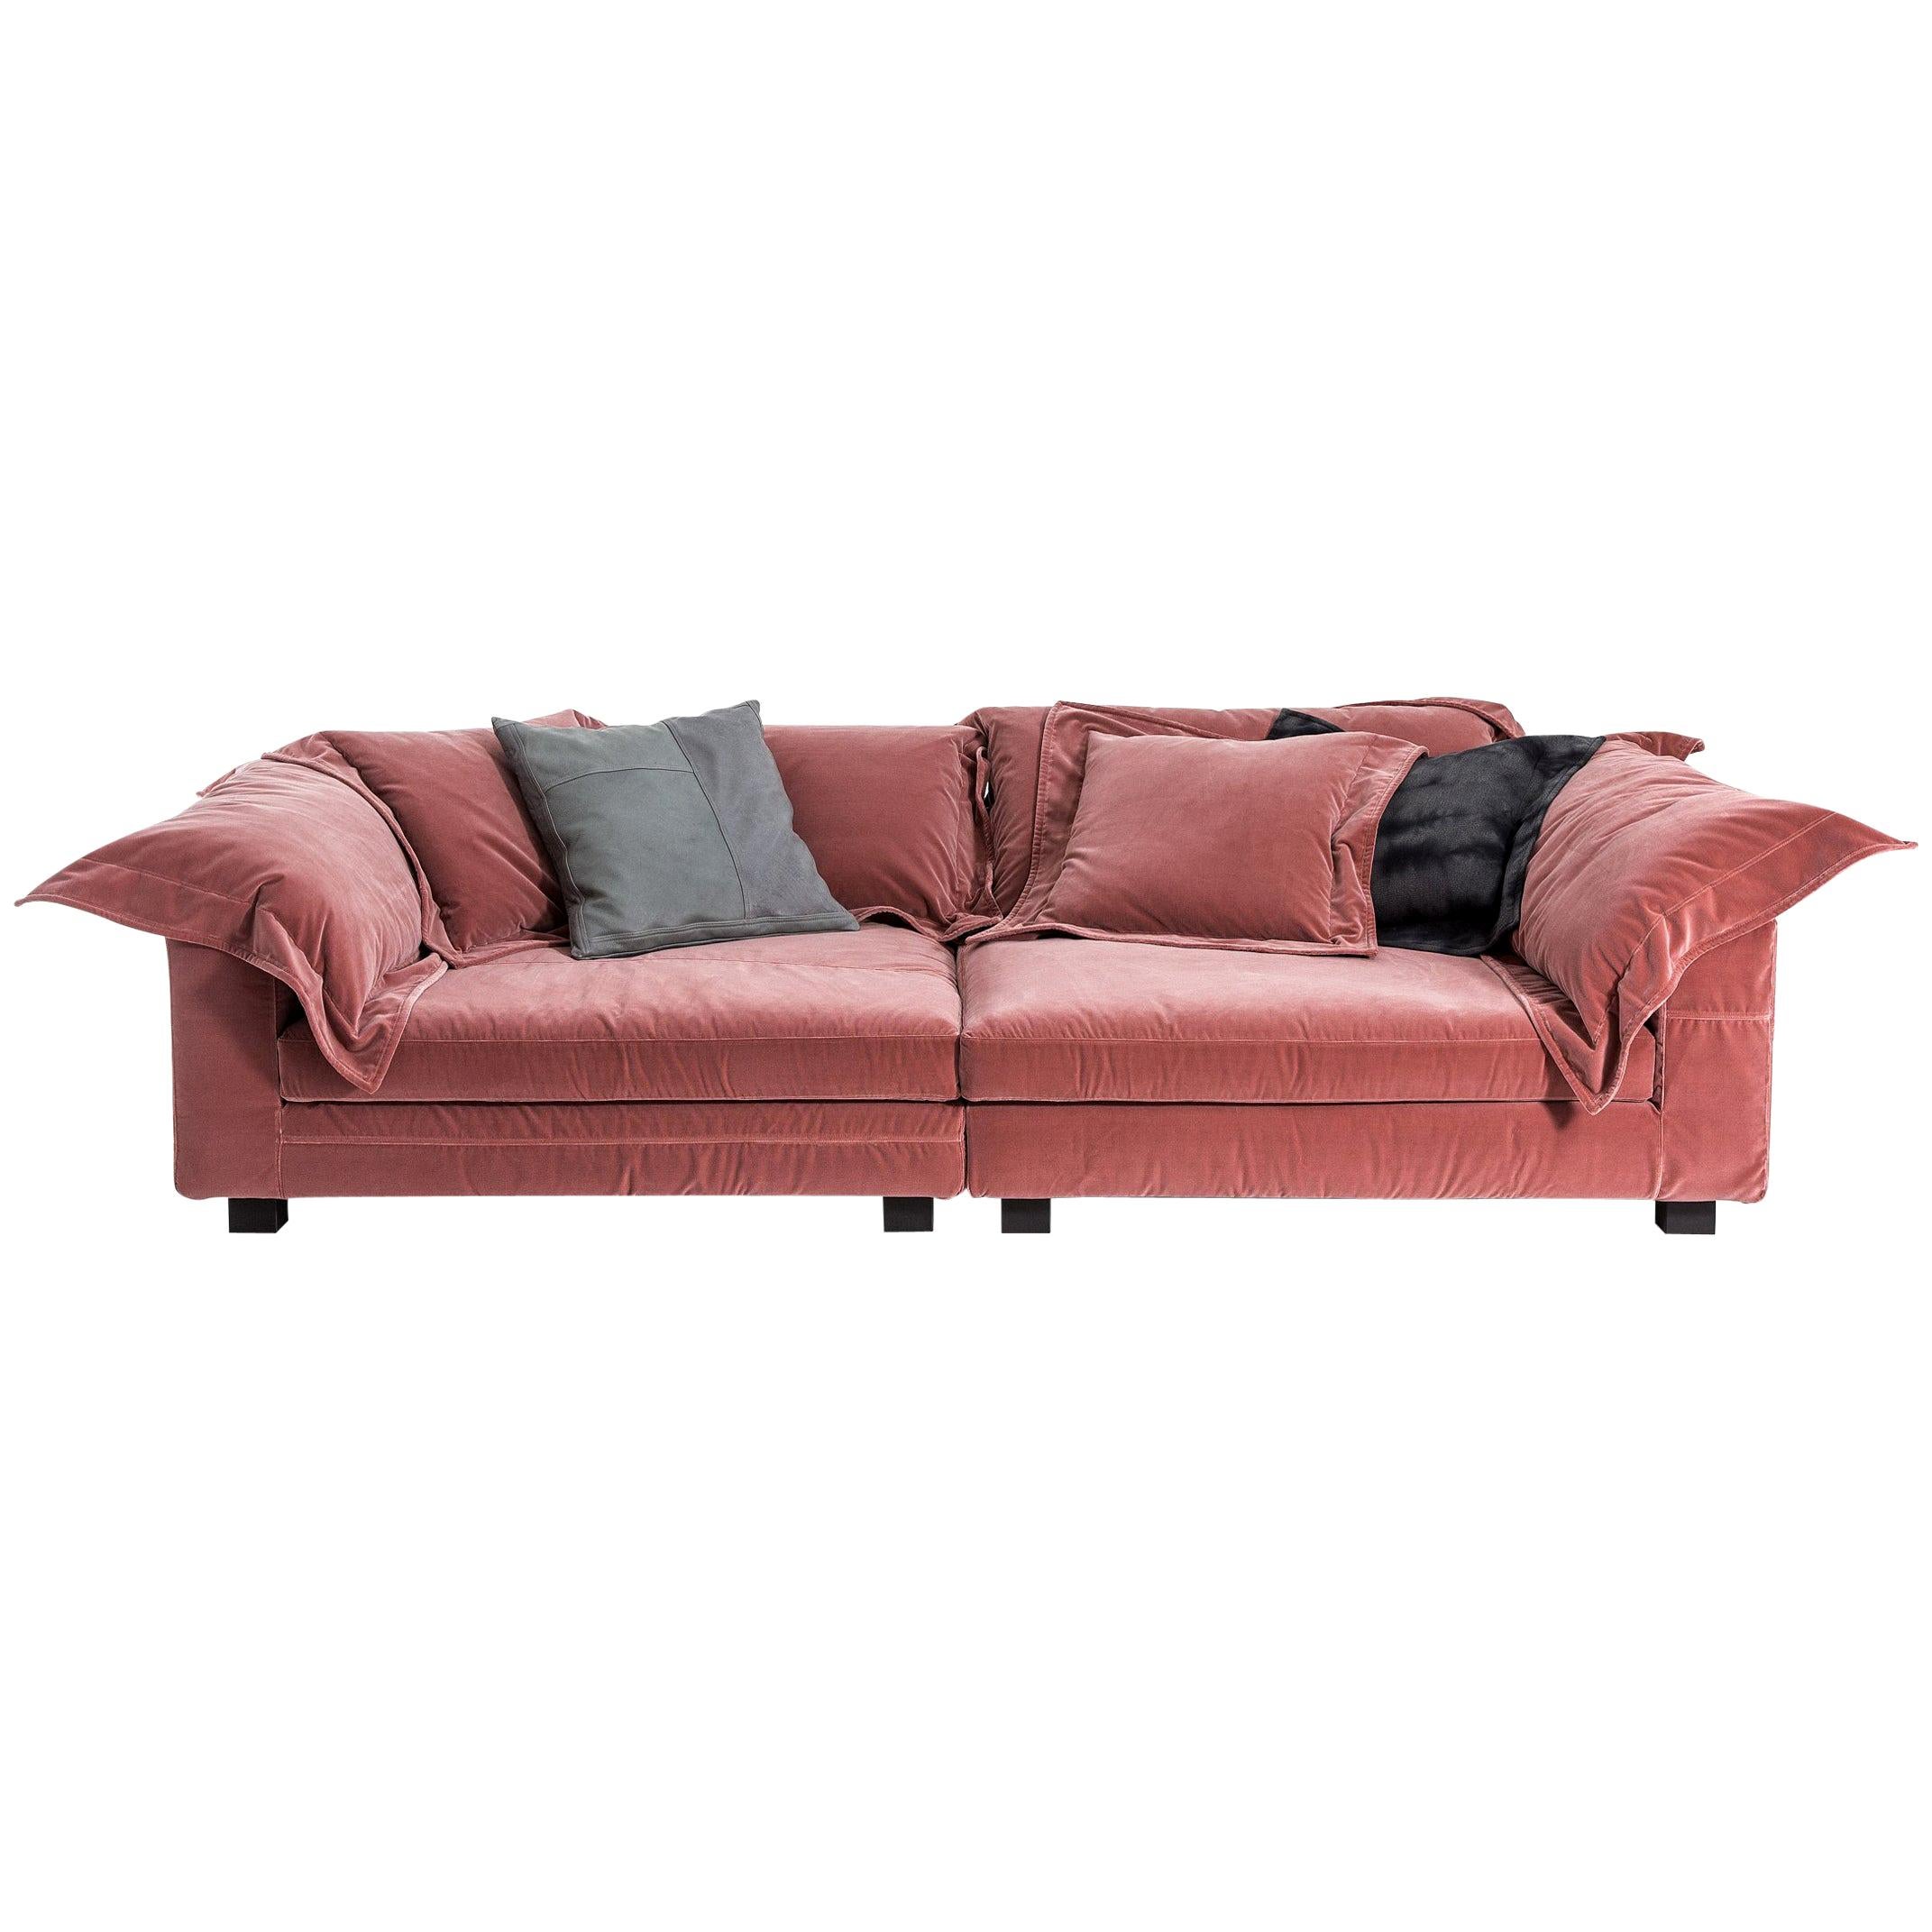 Nebula Nine" Cotton Linen Leather and Velvet Covered Sofa by Moroso and  Diesel For Sale at 1stDibs | nebula nine sofa, moroso diesel sofa, diesel  nebula nine sofa